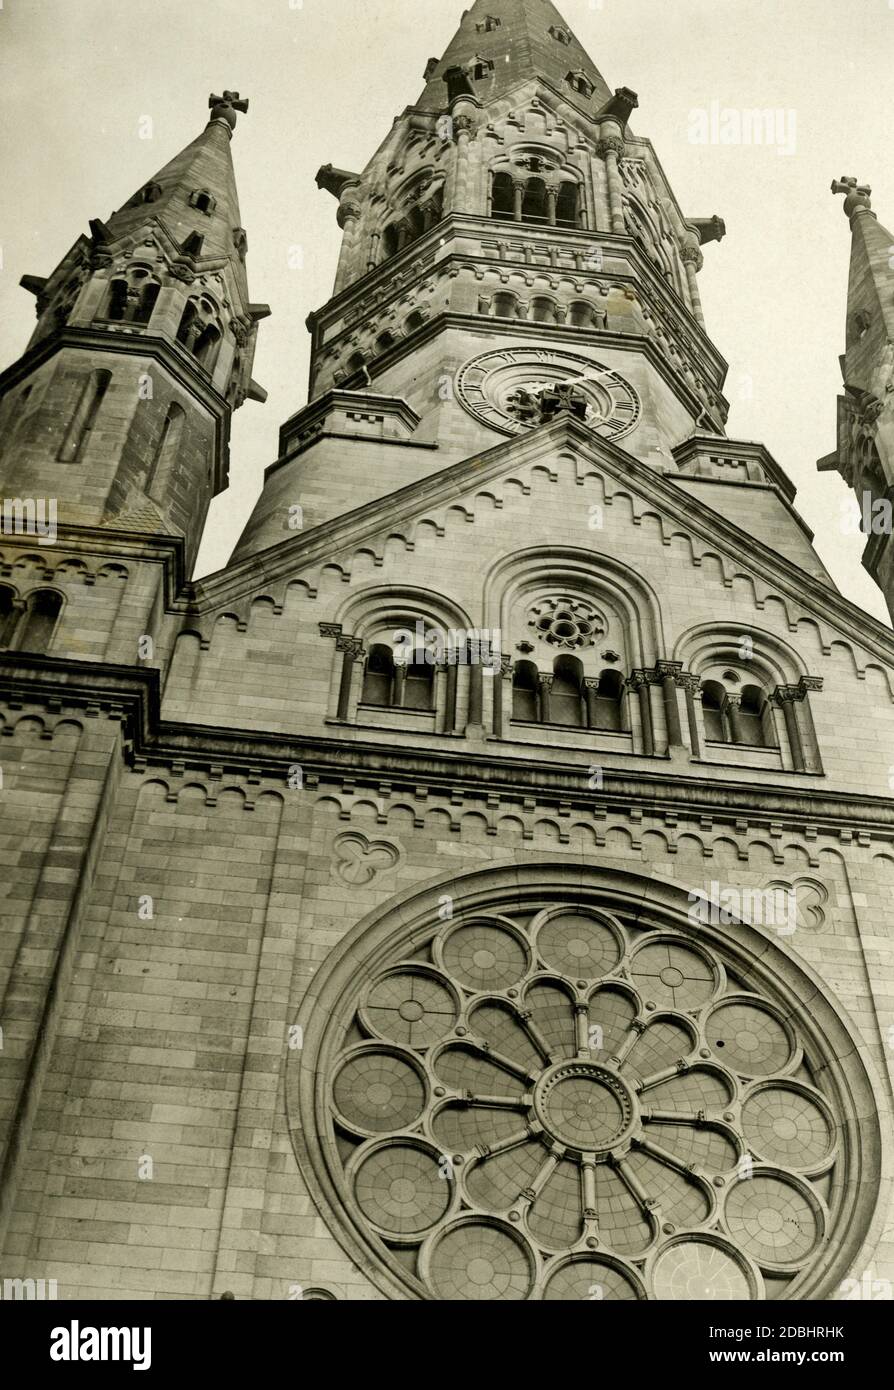 The photograph shows the steeple of the Kaiser Wilhelm Memorial Church in Berlin in 1926. Stock Photo